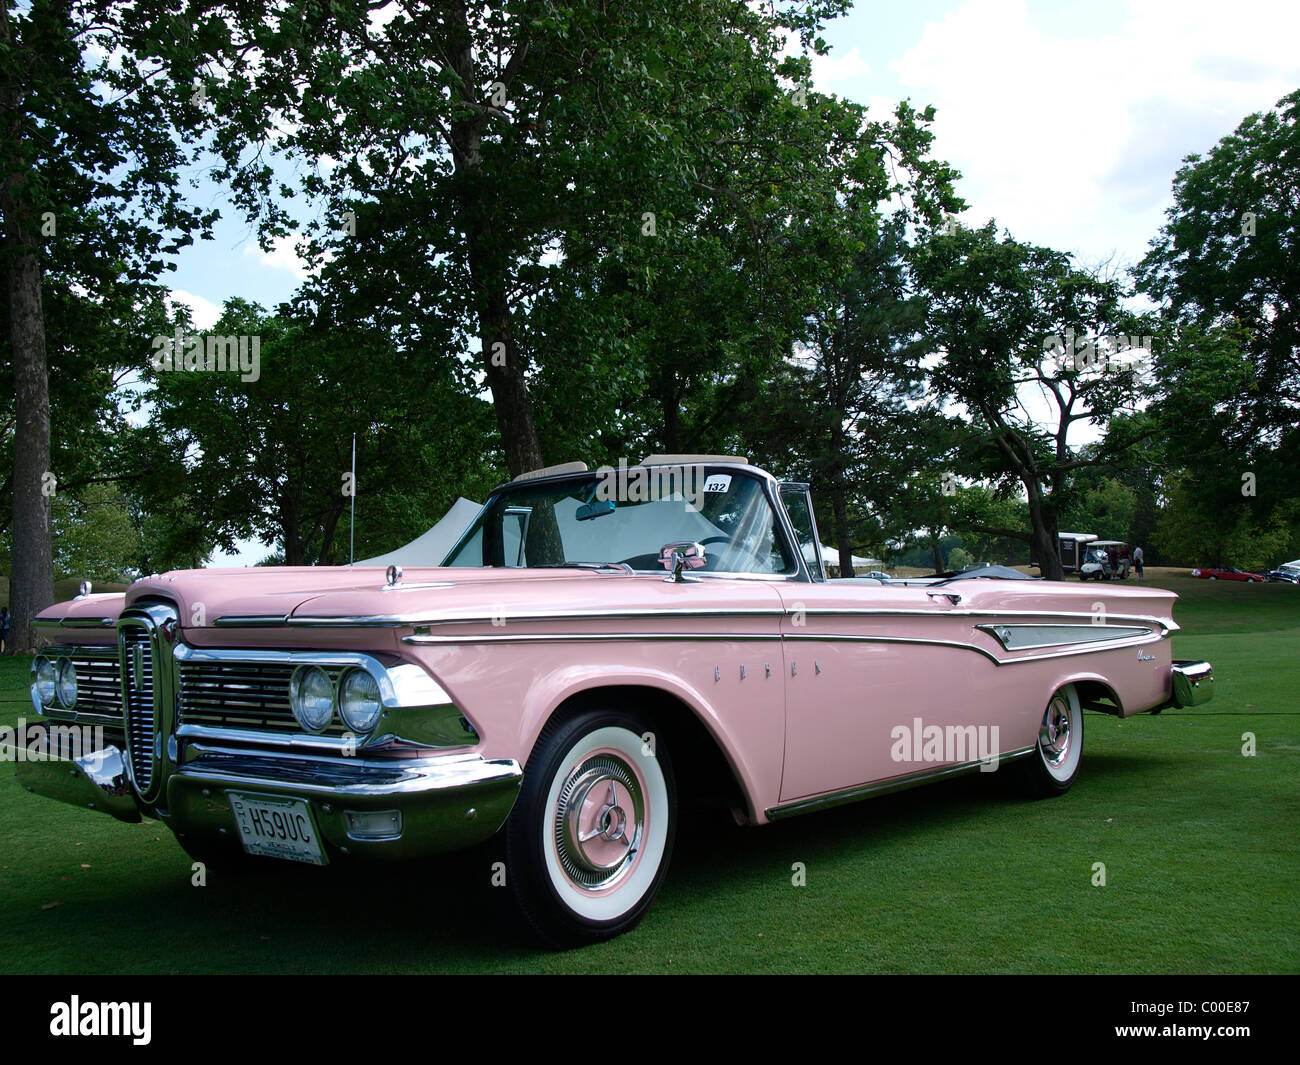 Concours d'Elegance is held at Oakland University's Meadow Brook Hall in Rochester, Michigan Classic Pink Galaxy Convertible Stock Photo